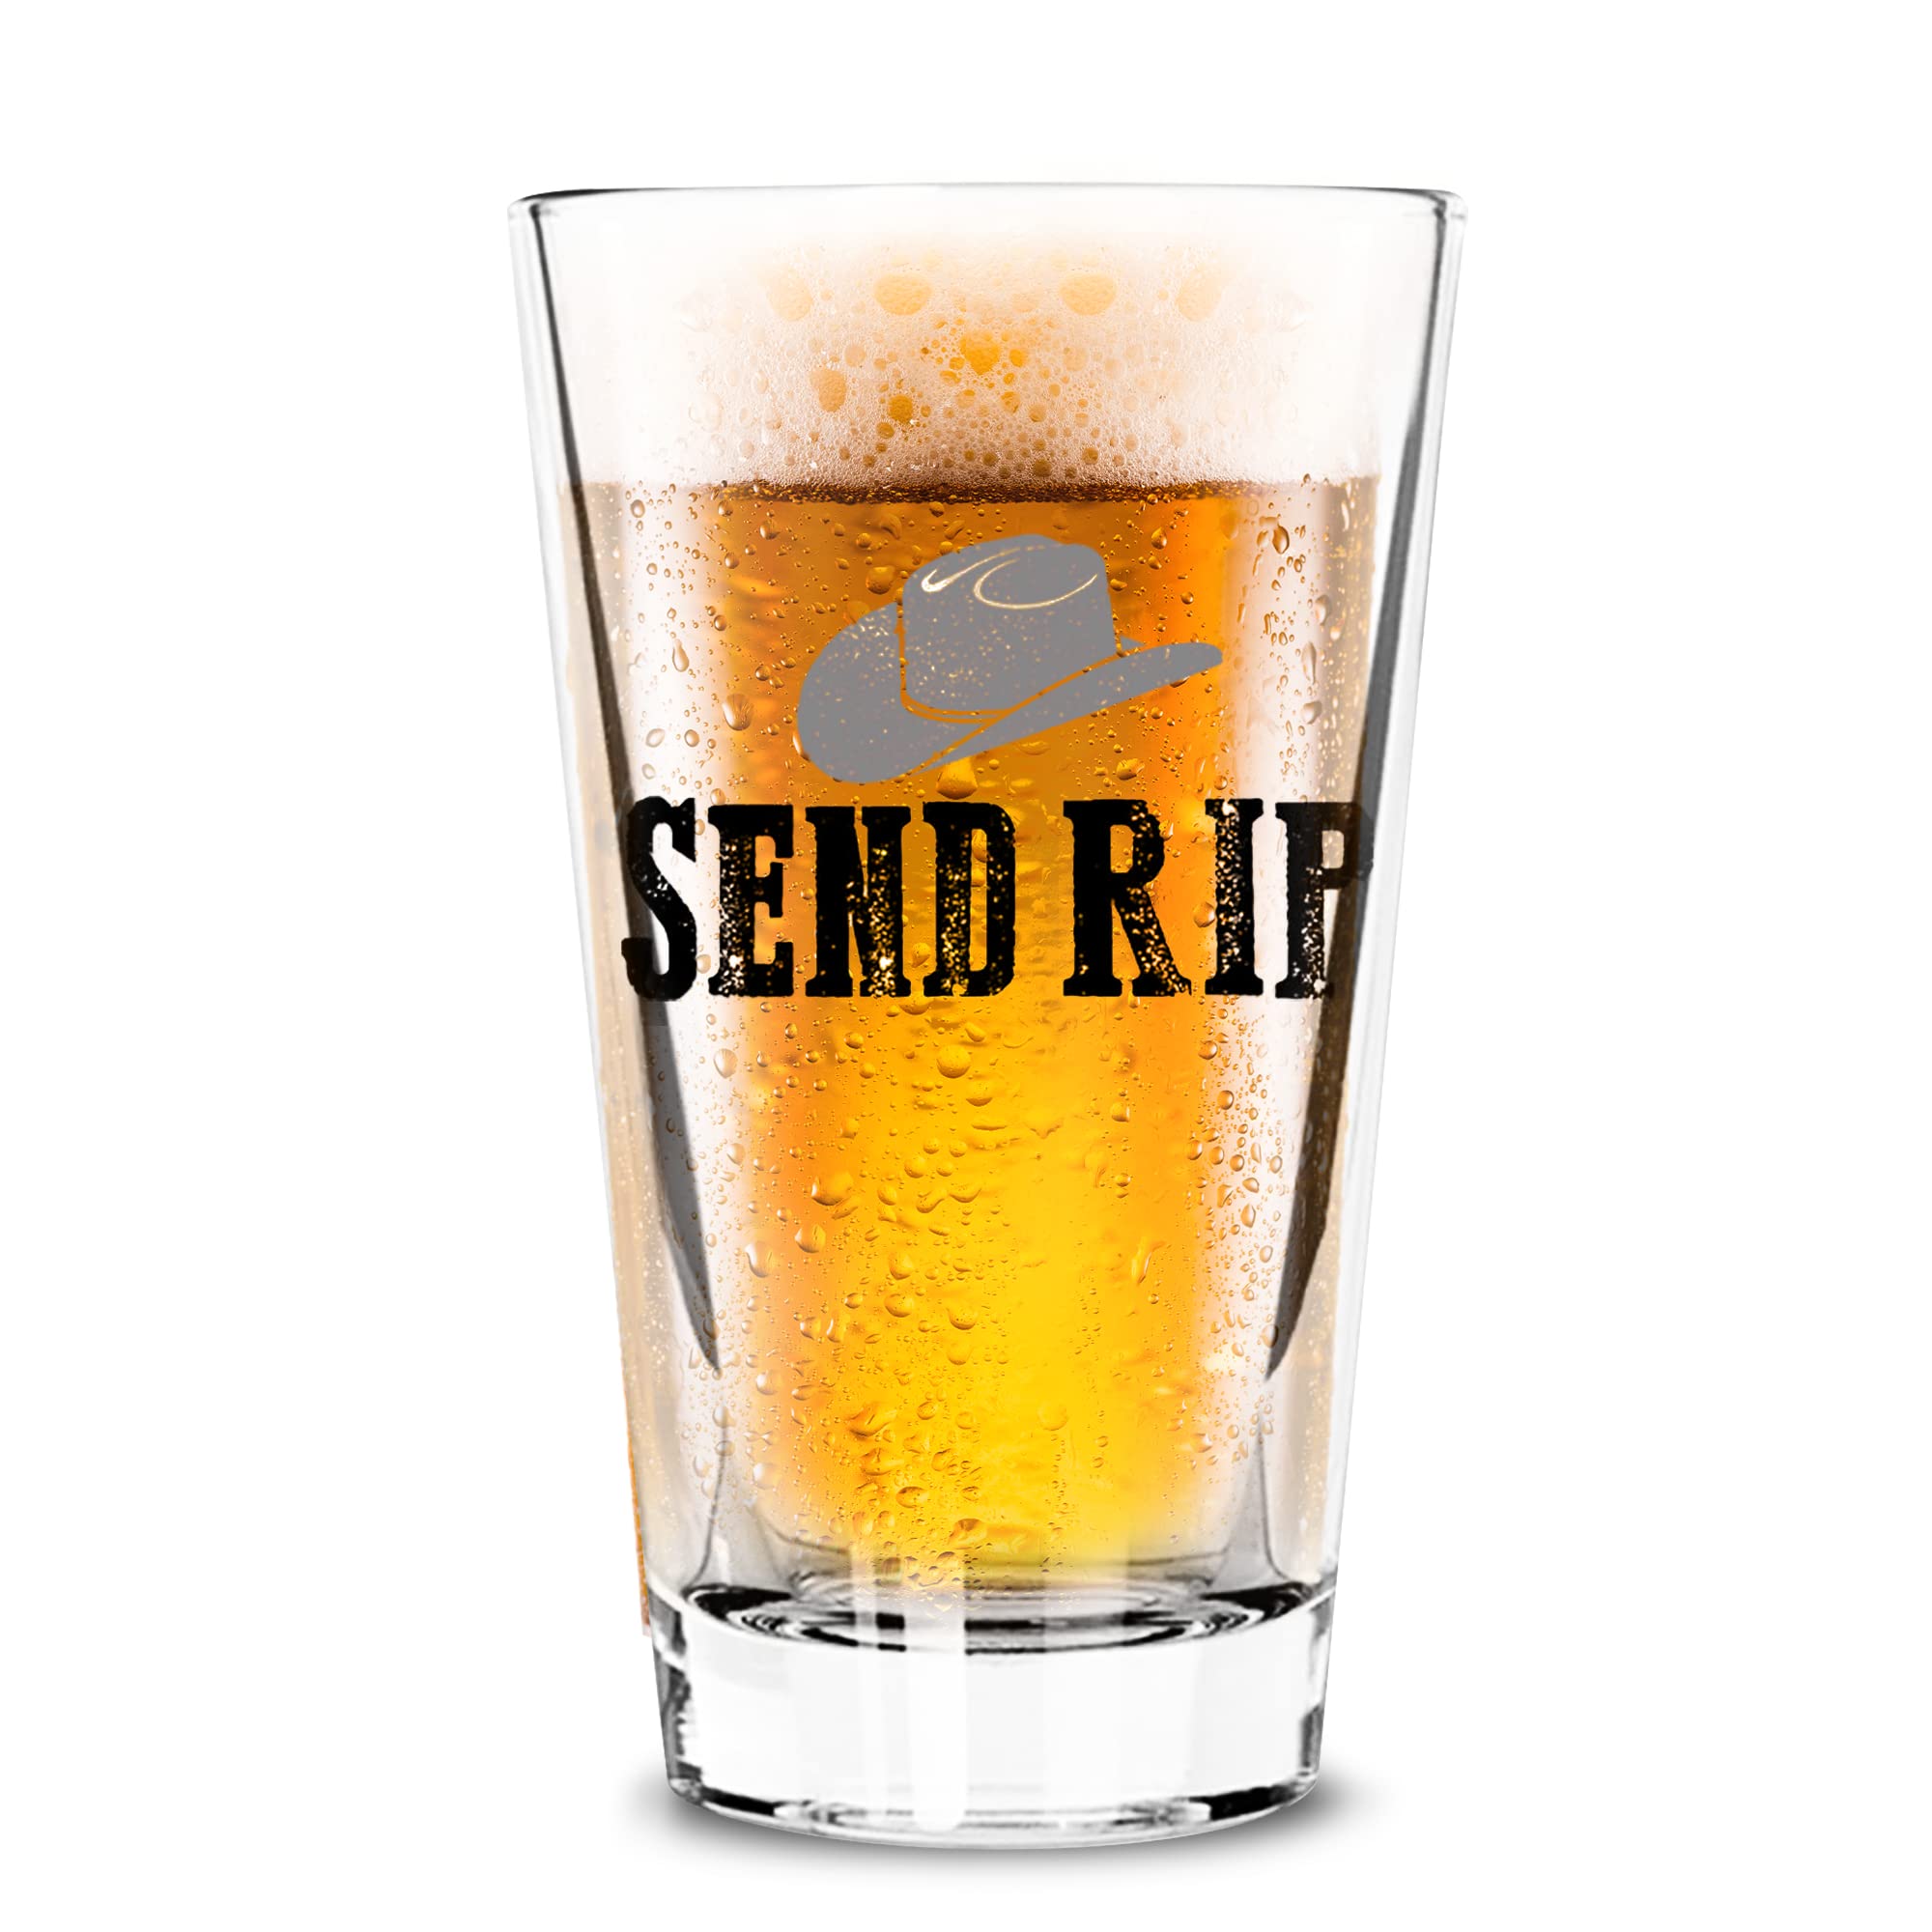 Toasted Tales Send RIP | Classic Beer Pint Glass 16 oz. | Highball Cocktail Mixing Class | Bar Quality Glassware | Perfect Glass Beer Steins for Cold Beverages